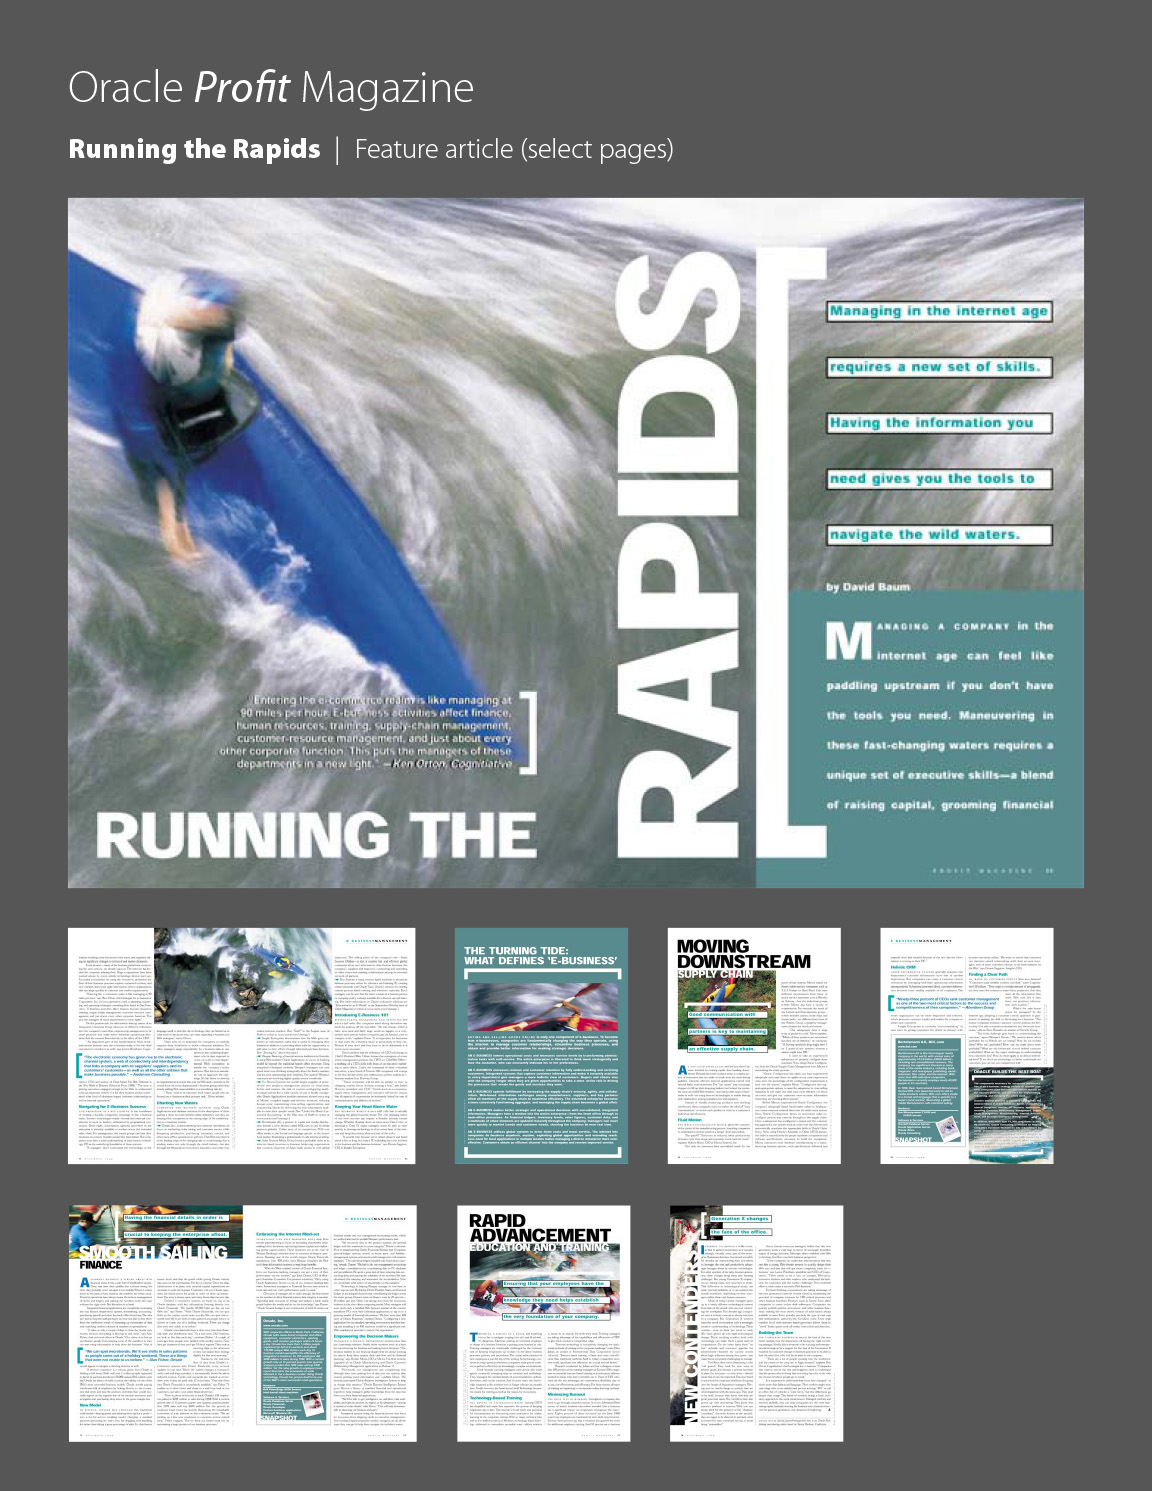 Oracle Profit magazine feature article, Running the Rapids